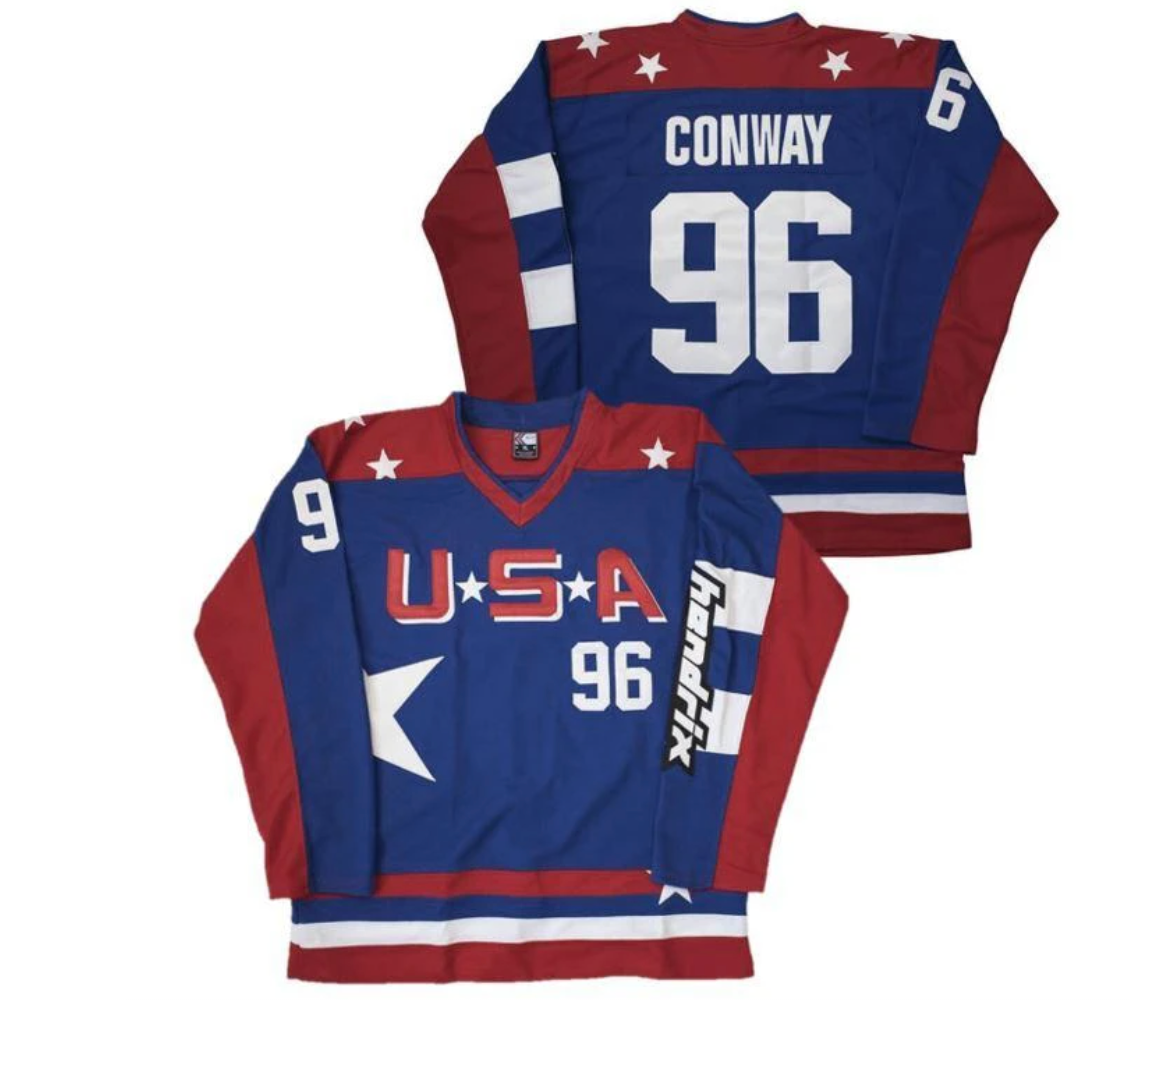 Conway X Mighty Ducks Team USA Jersey